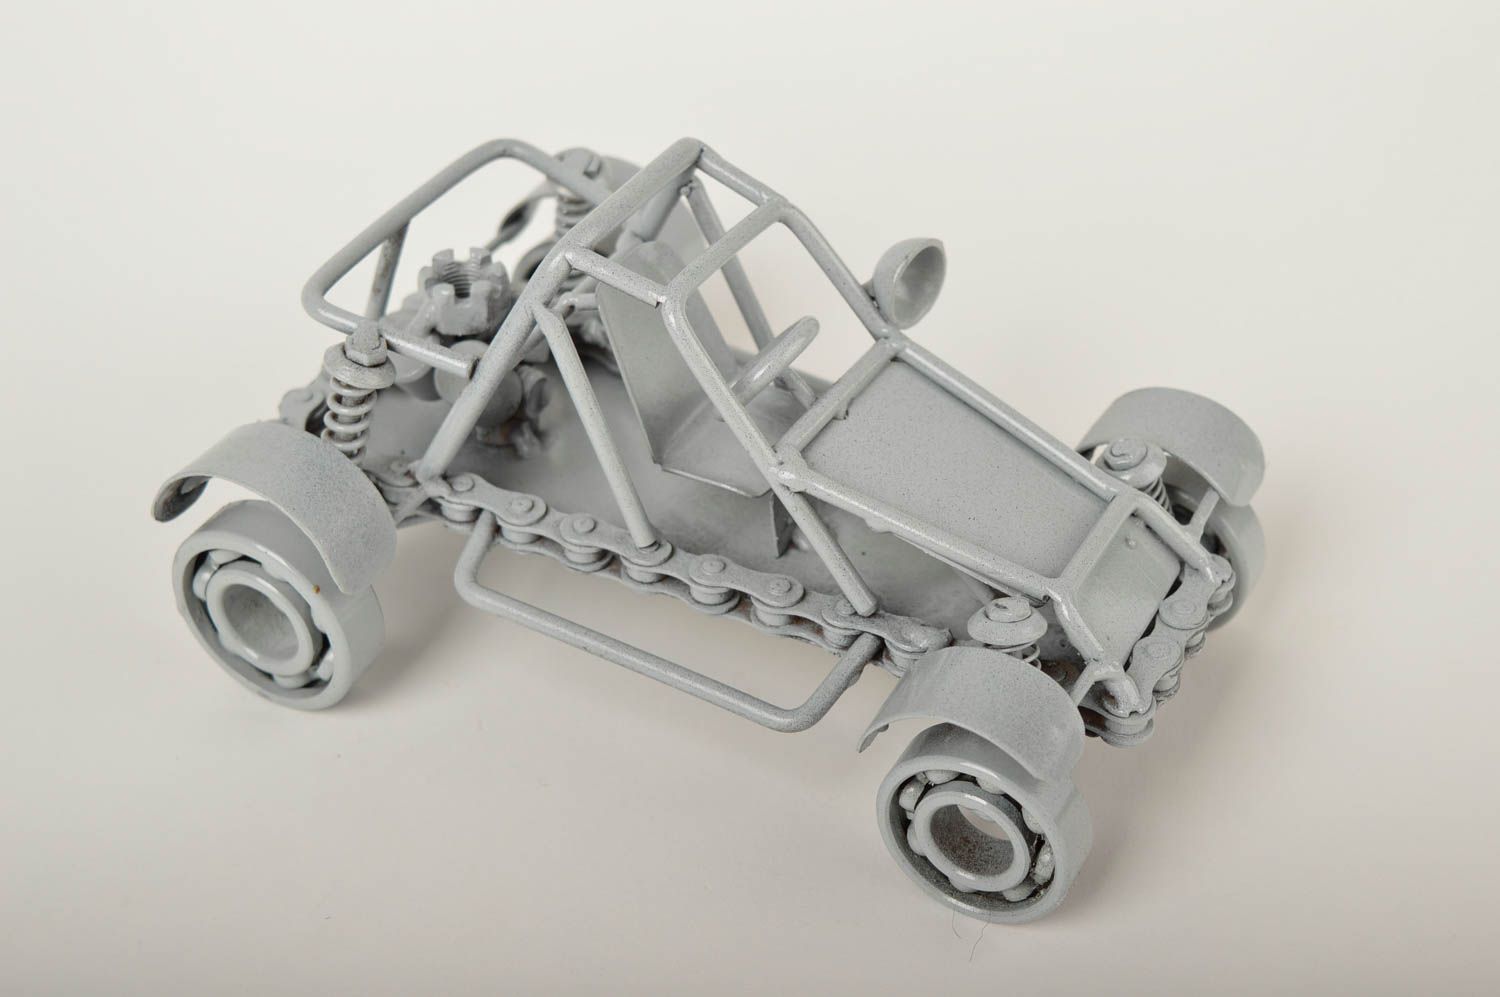 Handmade metal figurine car model metal art for decorative use only gift for him photo 3